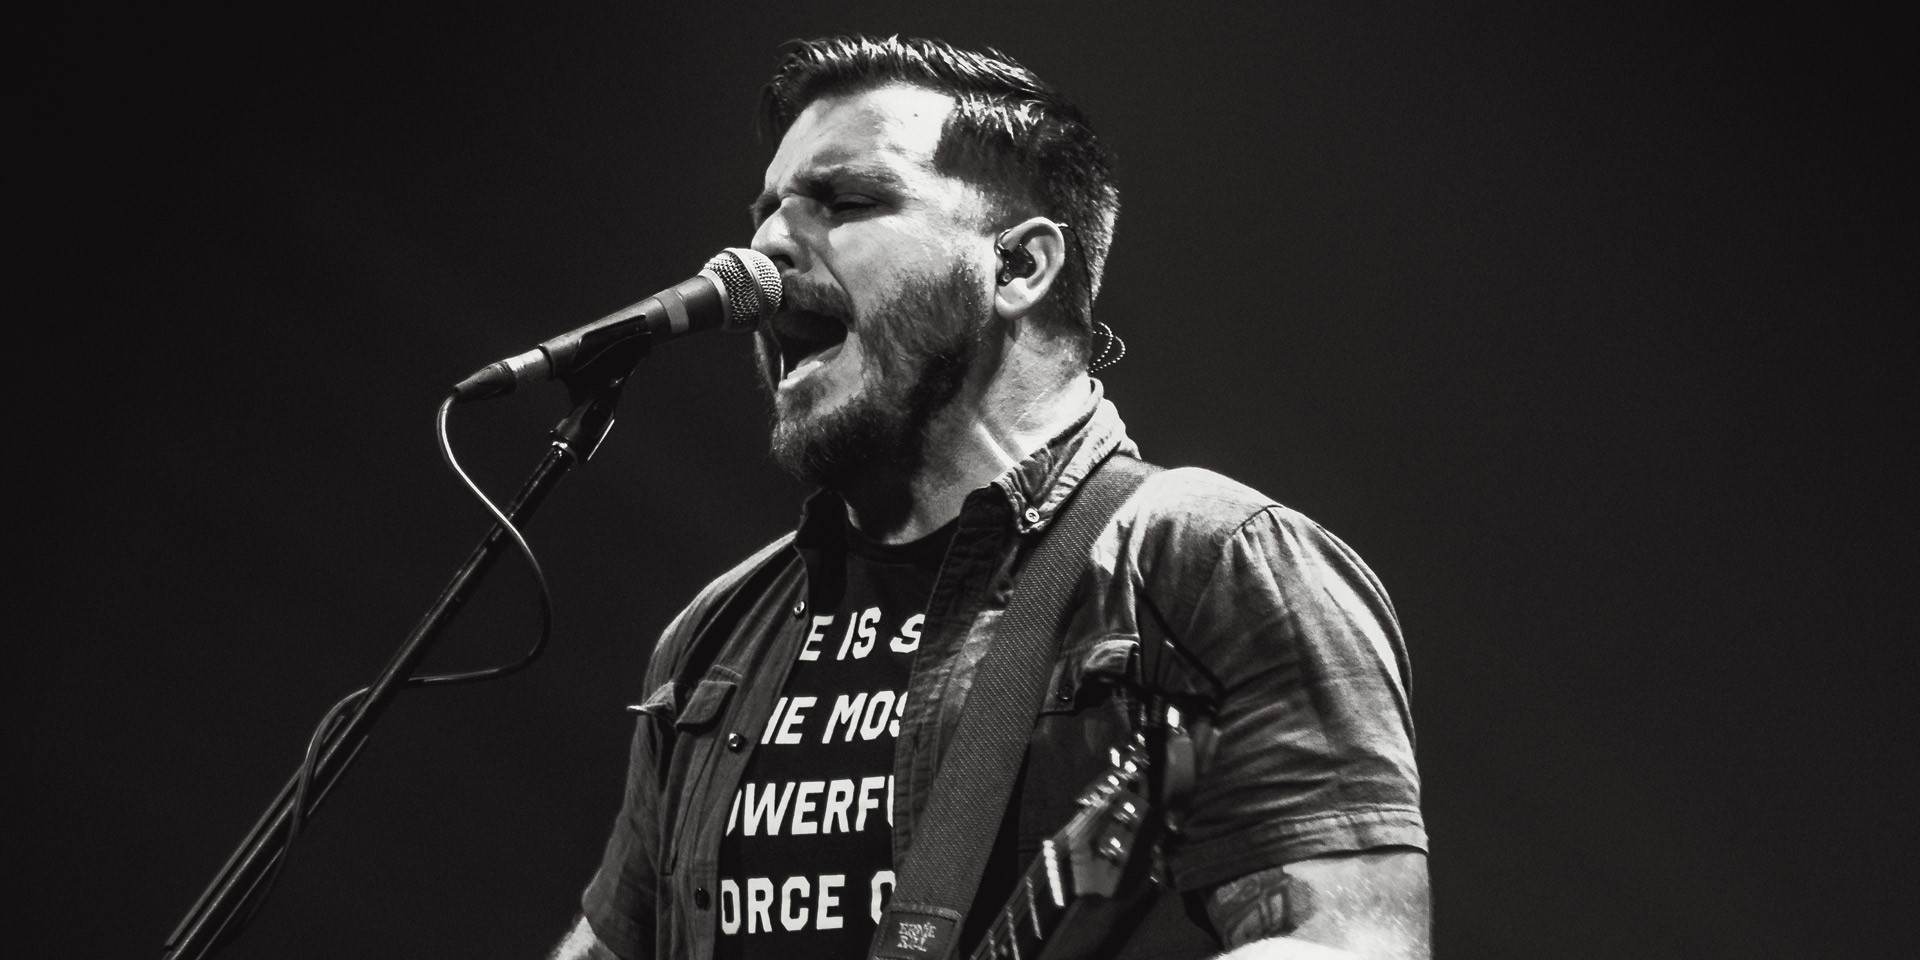 Thrice shook the Earth at Manila debut concert – photo gallery